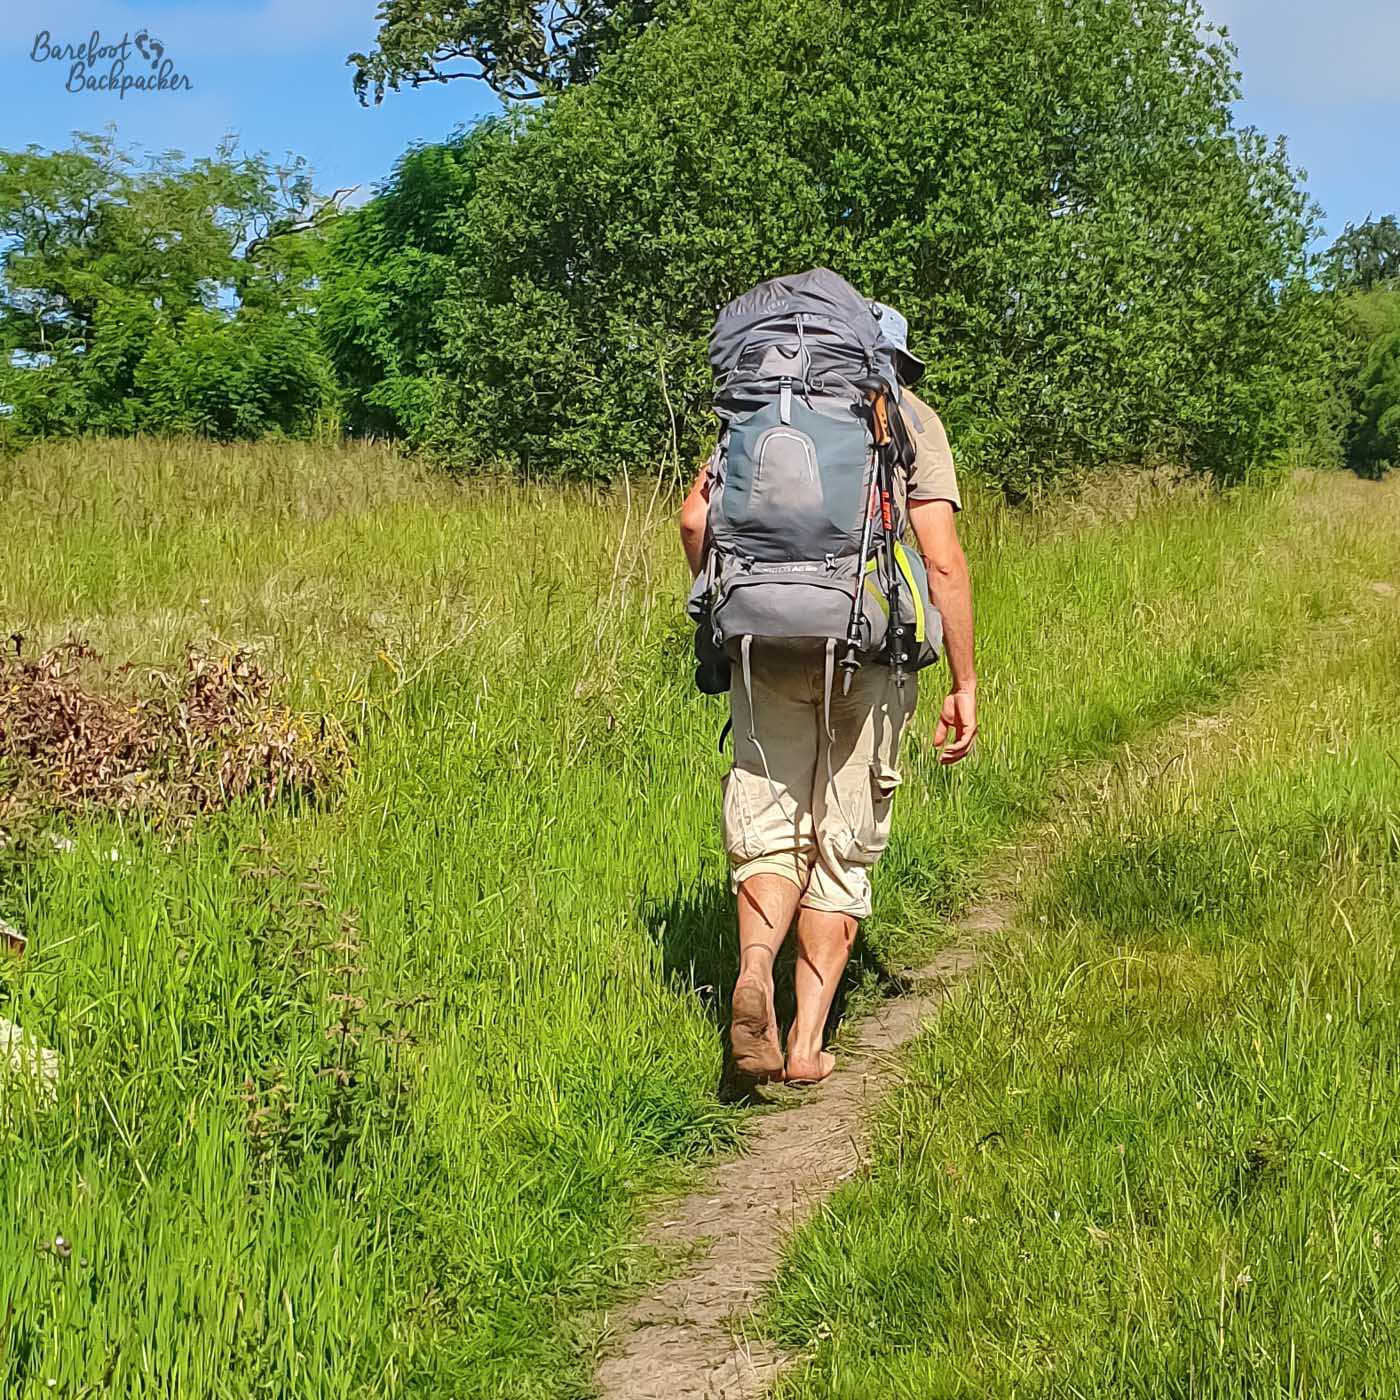 Someone is hiking away from the camera down an assumed path in the grasses, towards a woodland. They are carrying a large backpack and are barefoot.